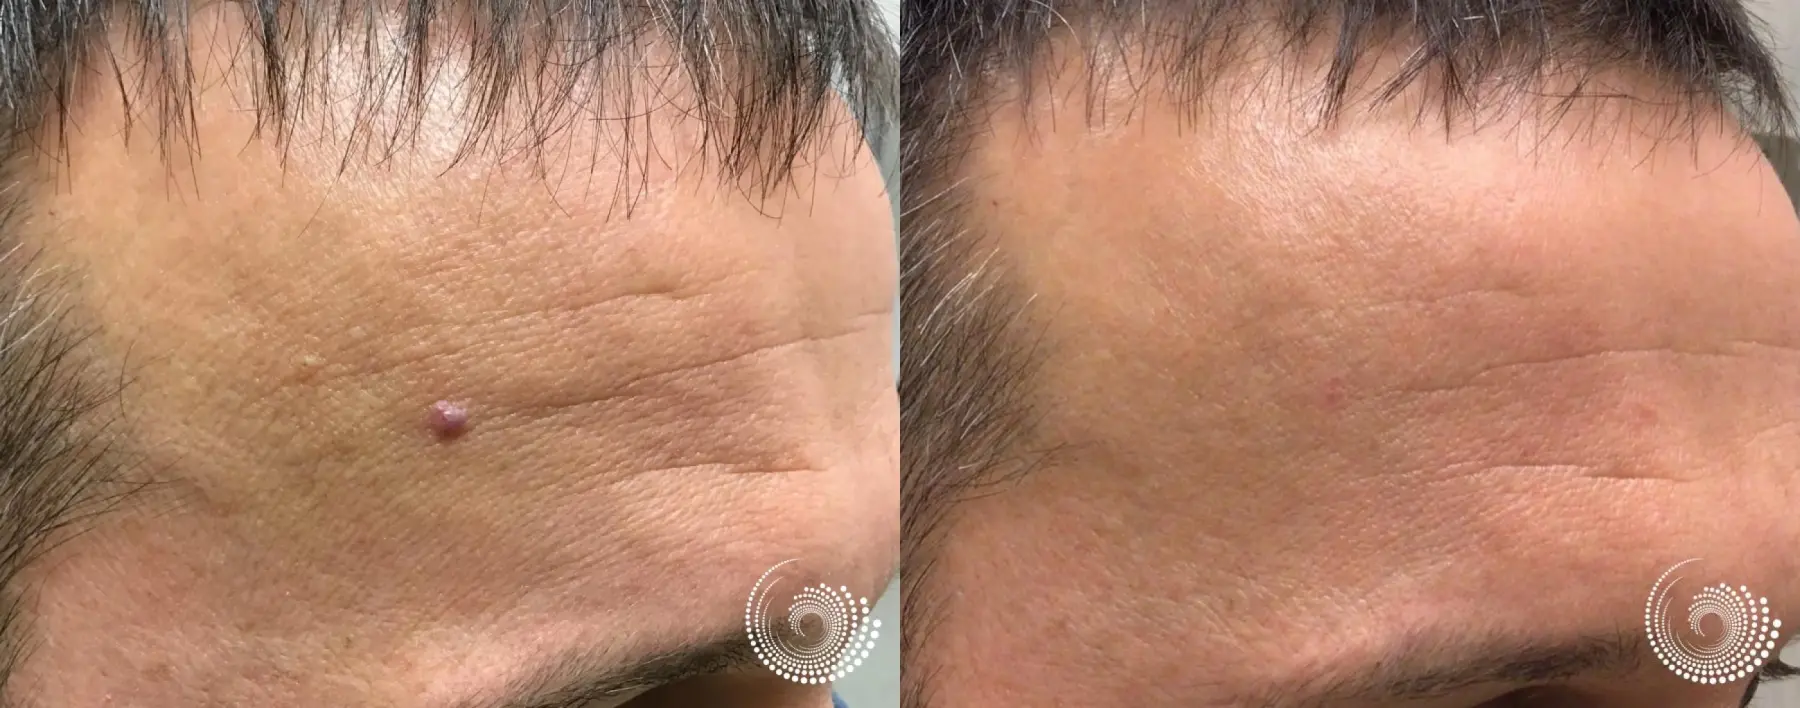 Laser - YAG: Patient 1 - Before and After  